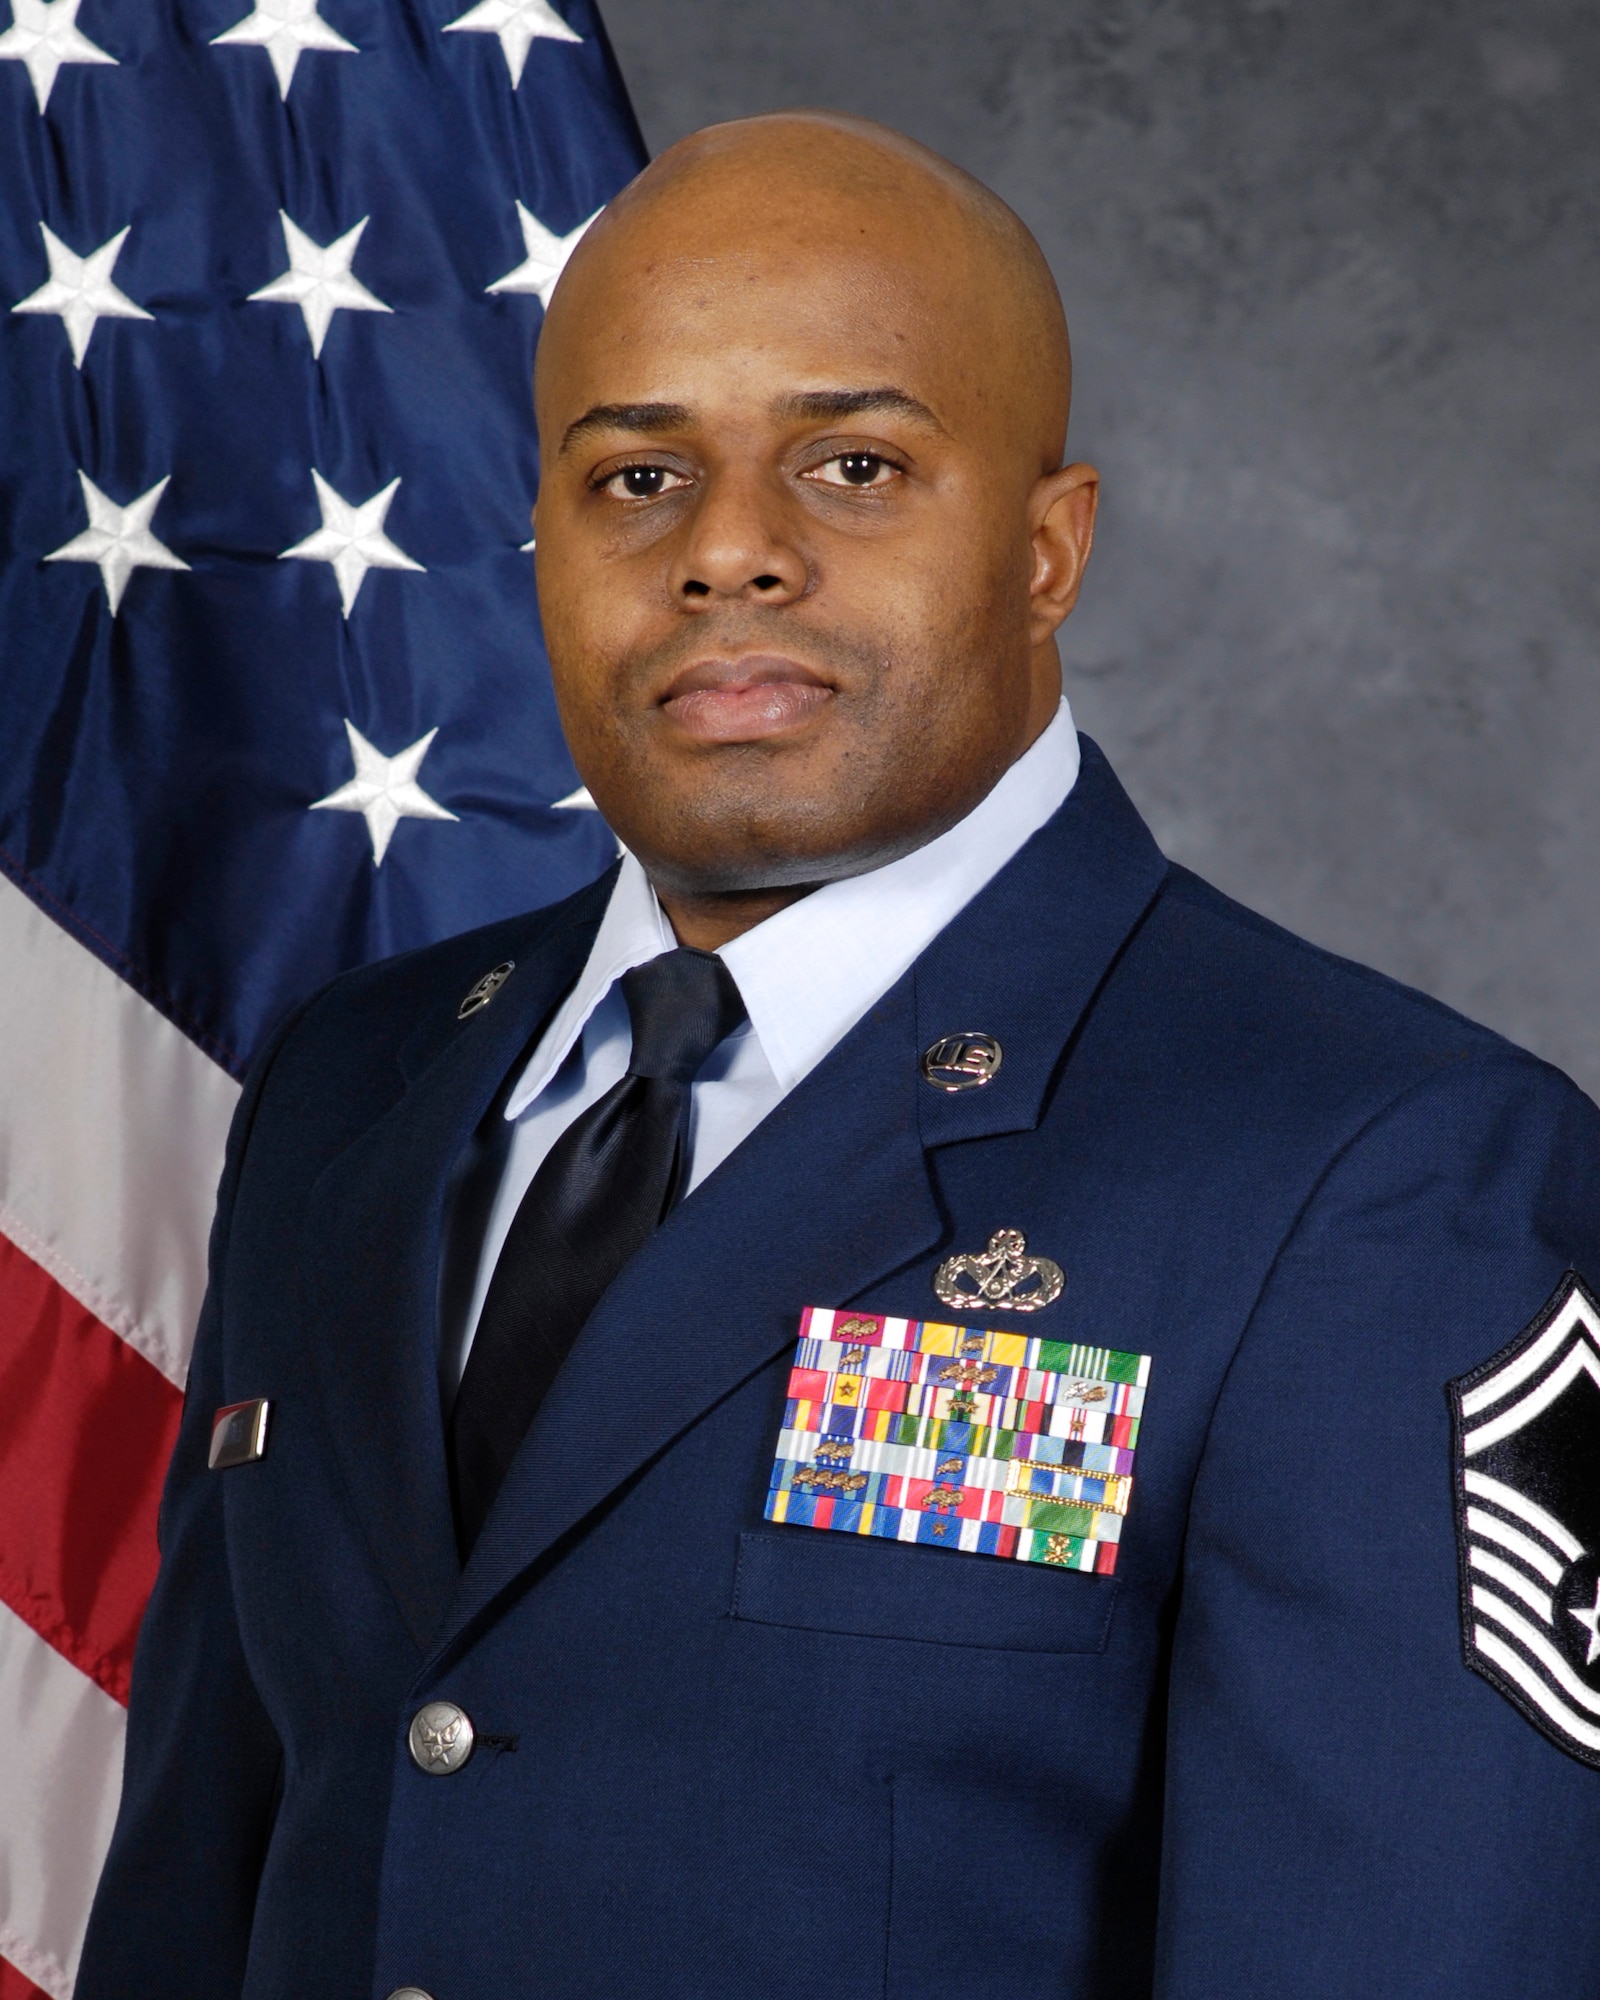 Senior Master Sgt. Patrick Jones, from the 375th Civil Engineer Squadron at Scott Air Force Base, Ill., was named the 2010 Air Mobility Command Senior NCO of the Year.  Sergeant Jones is the operations superintendent for the 375th CES at Scott AFB. According to his award information, during 2010 he directed 250 engineers, maintained more than 820 facilities, and managed $1.4 million budget.  He also led the snow recovery efforts that enabled Scott AFB personnel to accomplish their airlift tasking mission in support of multiple world-wide operations. “Additionally, he is the co-founder of the Louisiana teen program where he authored after school tutoring courses helping to keep more than 260 underprivileged youths off the streets.” (U.S. Air Force Photo)

